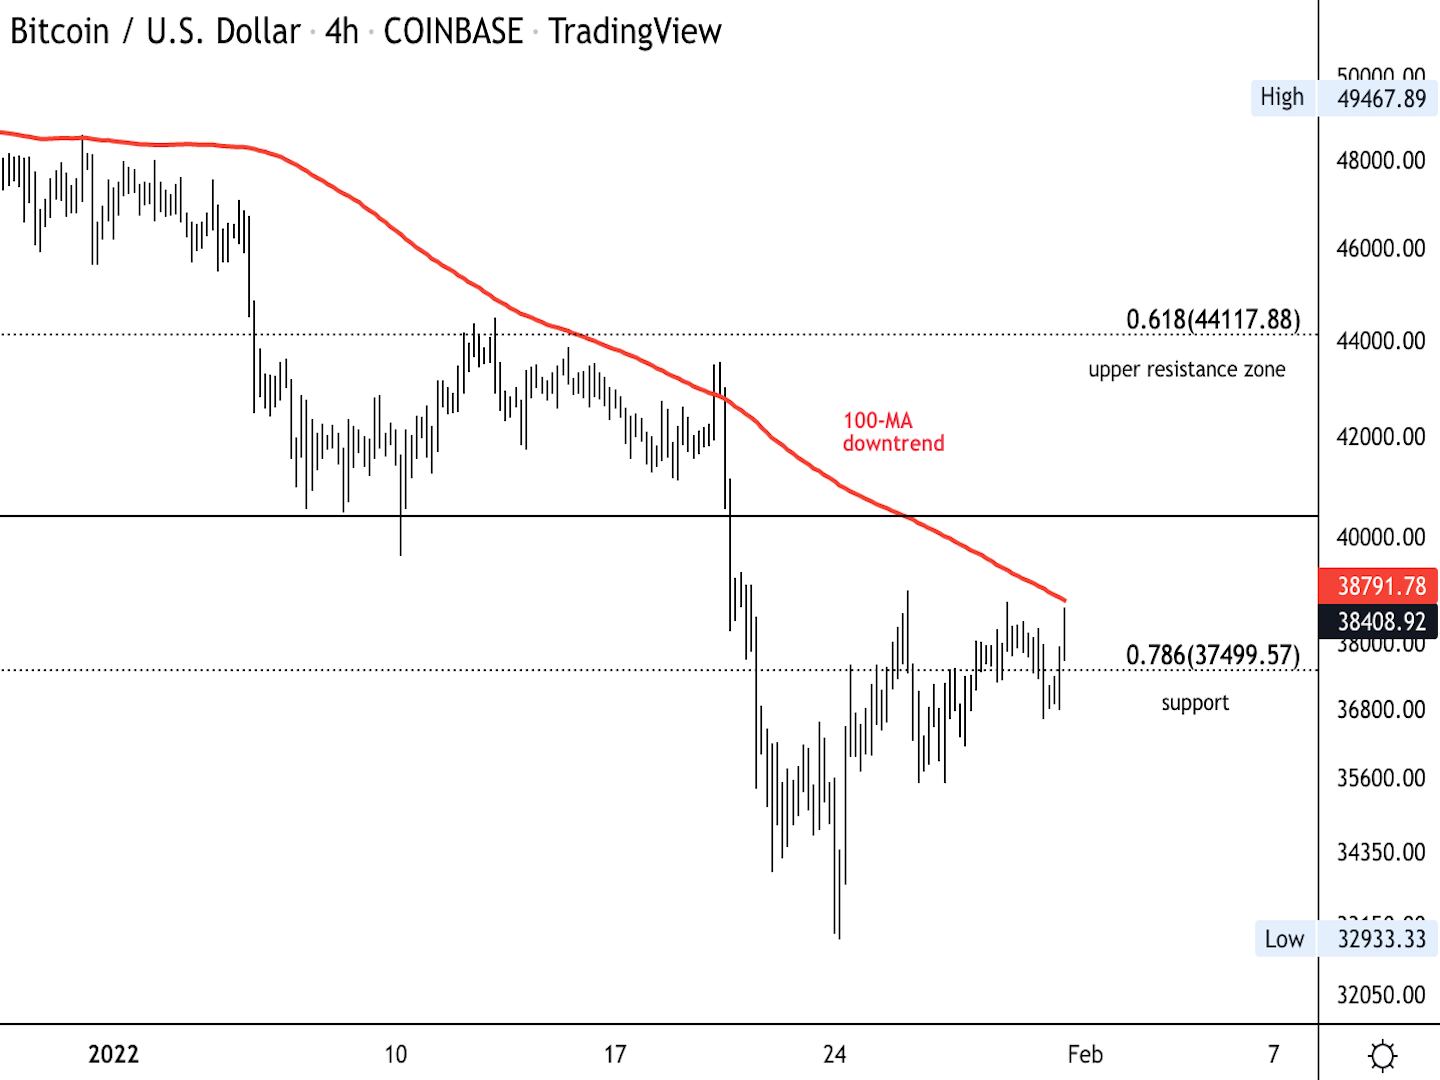 Bitcoin's four-hour price chart shows support/resistance levels. (Damanick Dantes, CoinDesk)